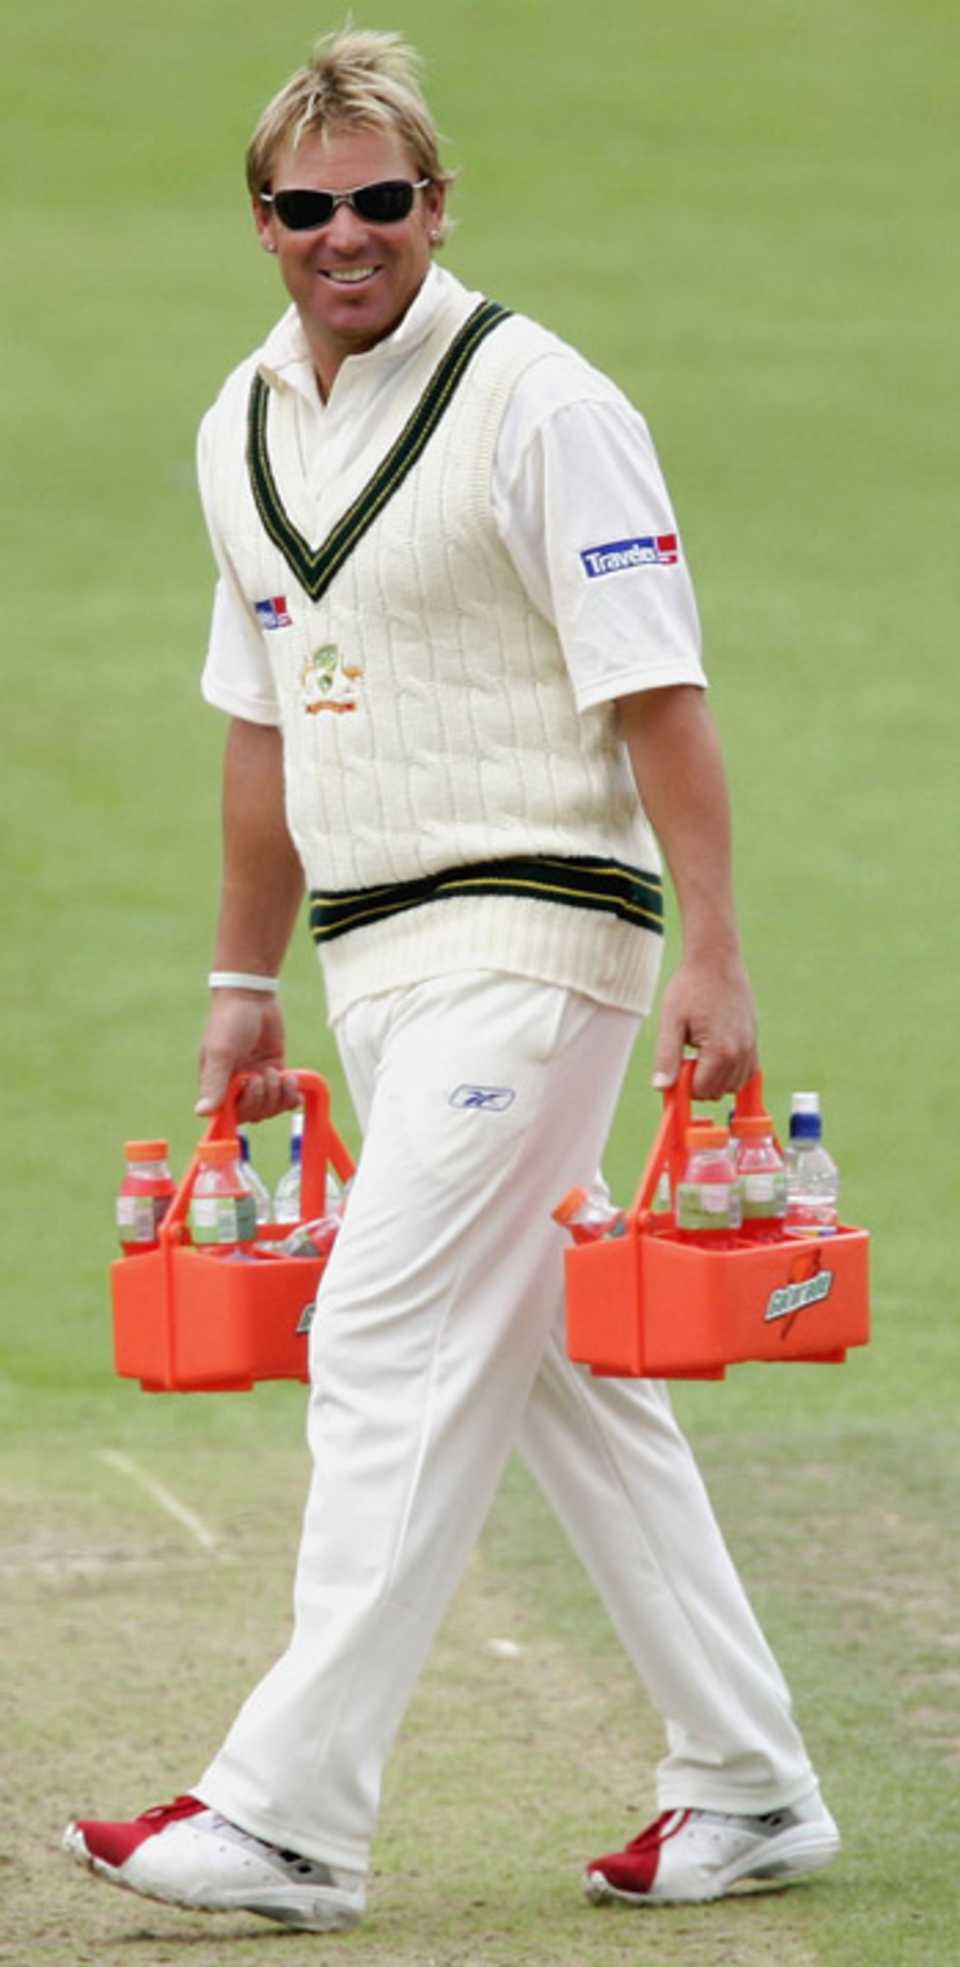 Shane Warne is relegated to drinks-carrying duties